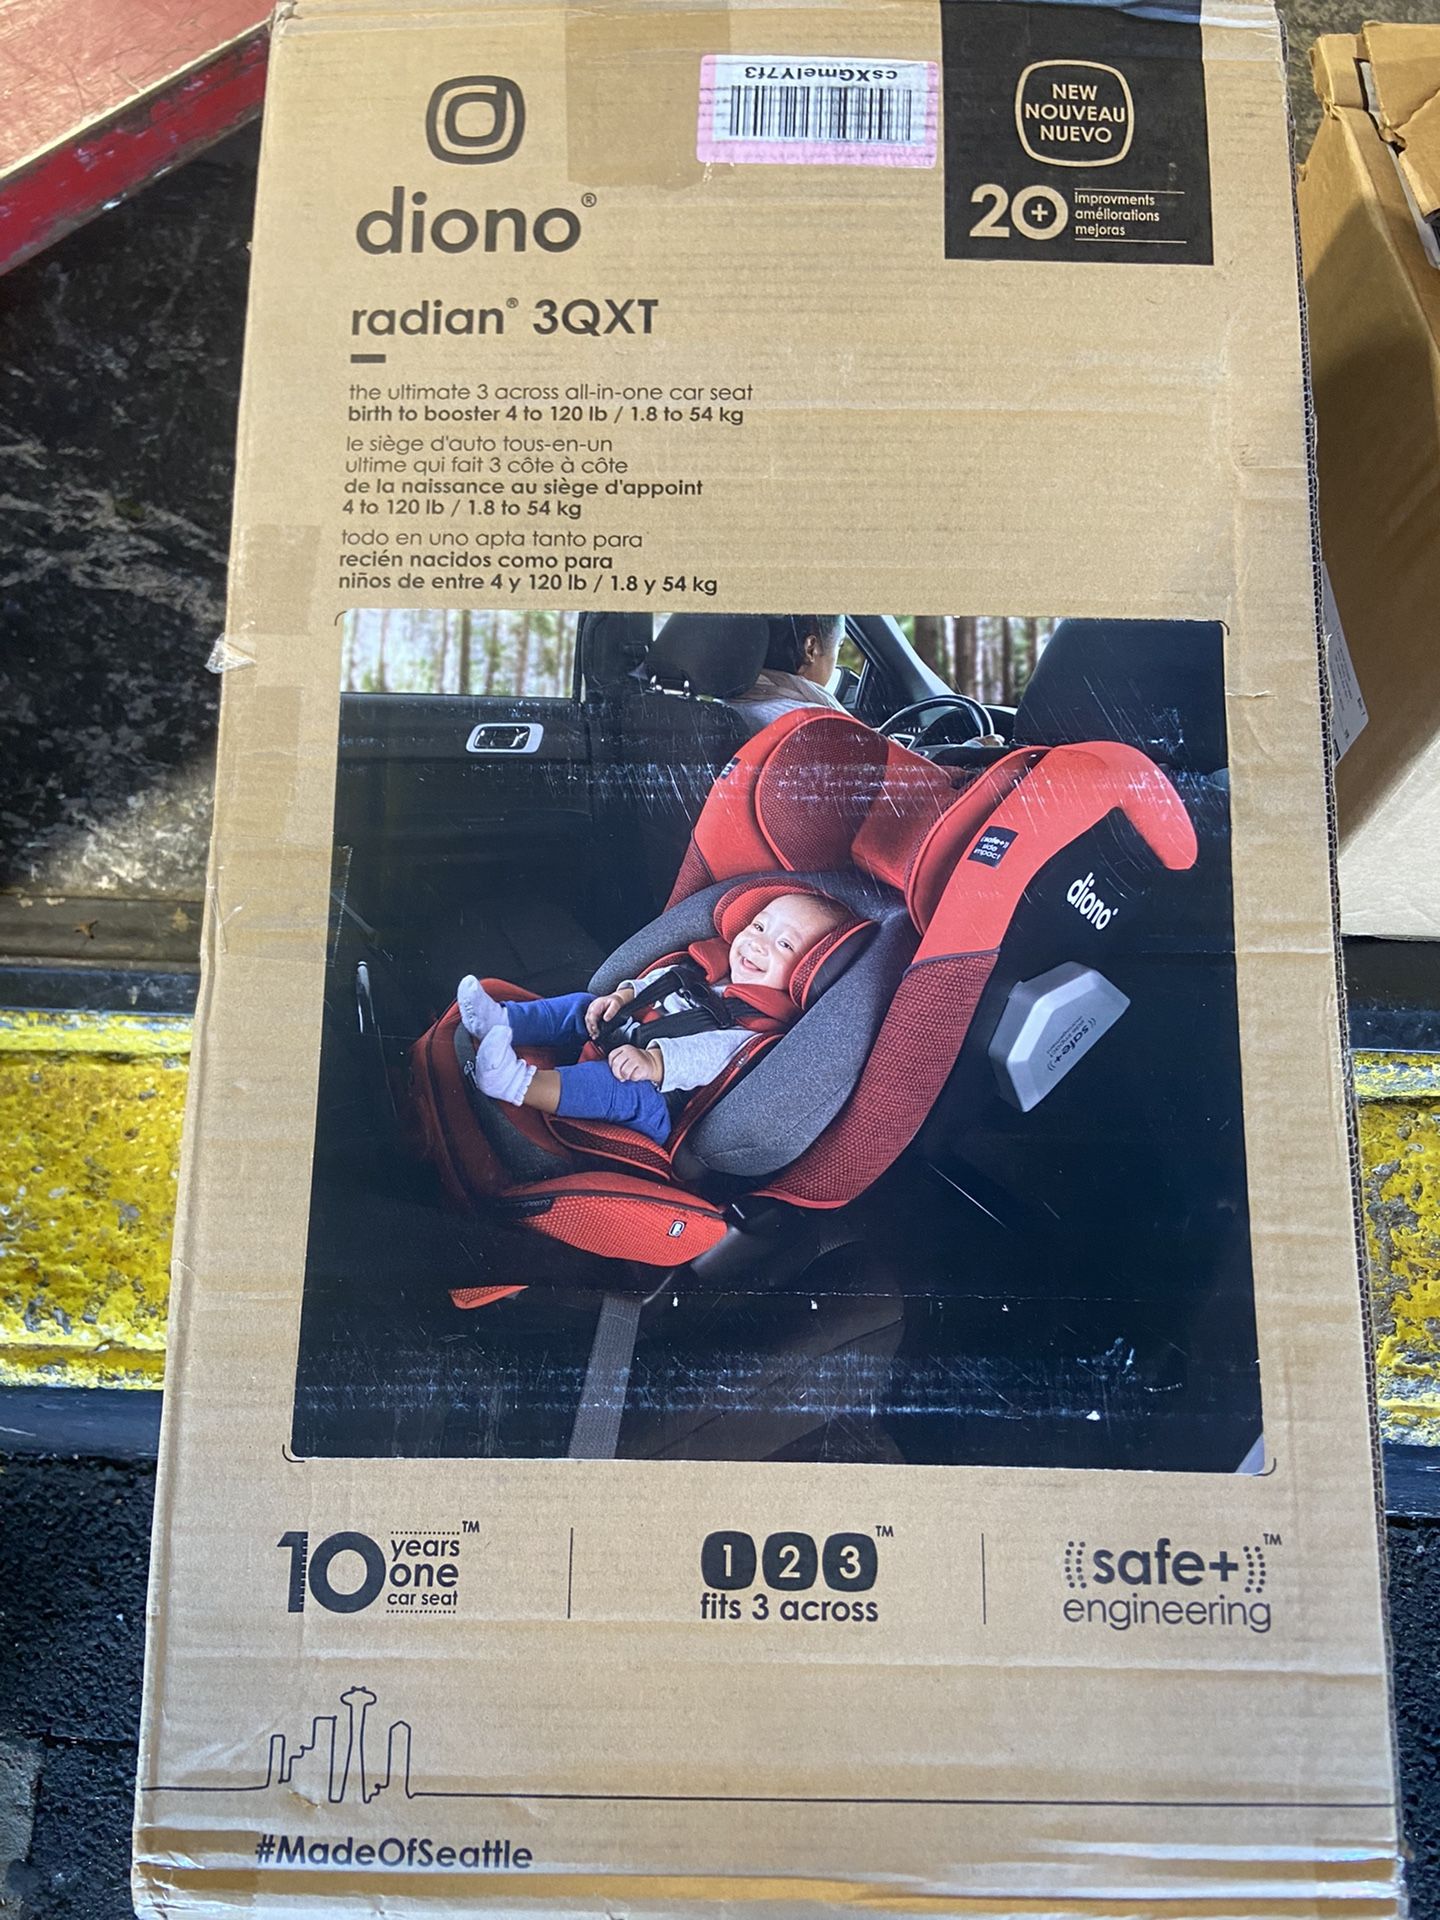 Diono Radian 3QXT 4- in-1 Rear and Forward Facing Convertible Car Seat, Safe Plus Engineering, 4 Stage Infant Protection, 10 Years 1 Car Seat,